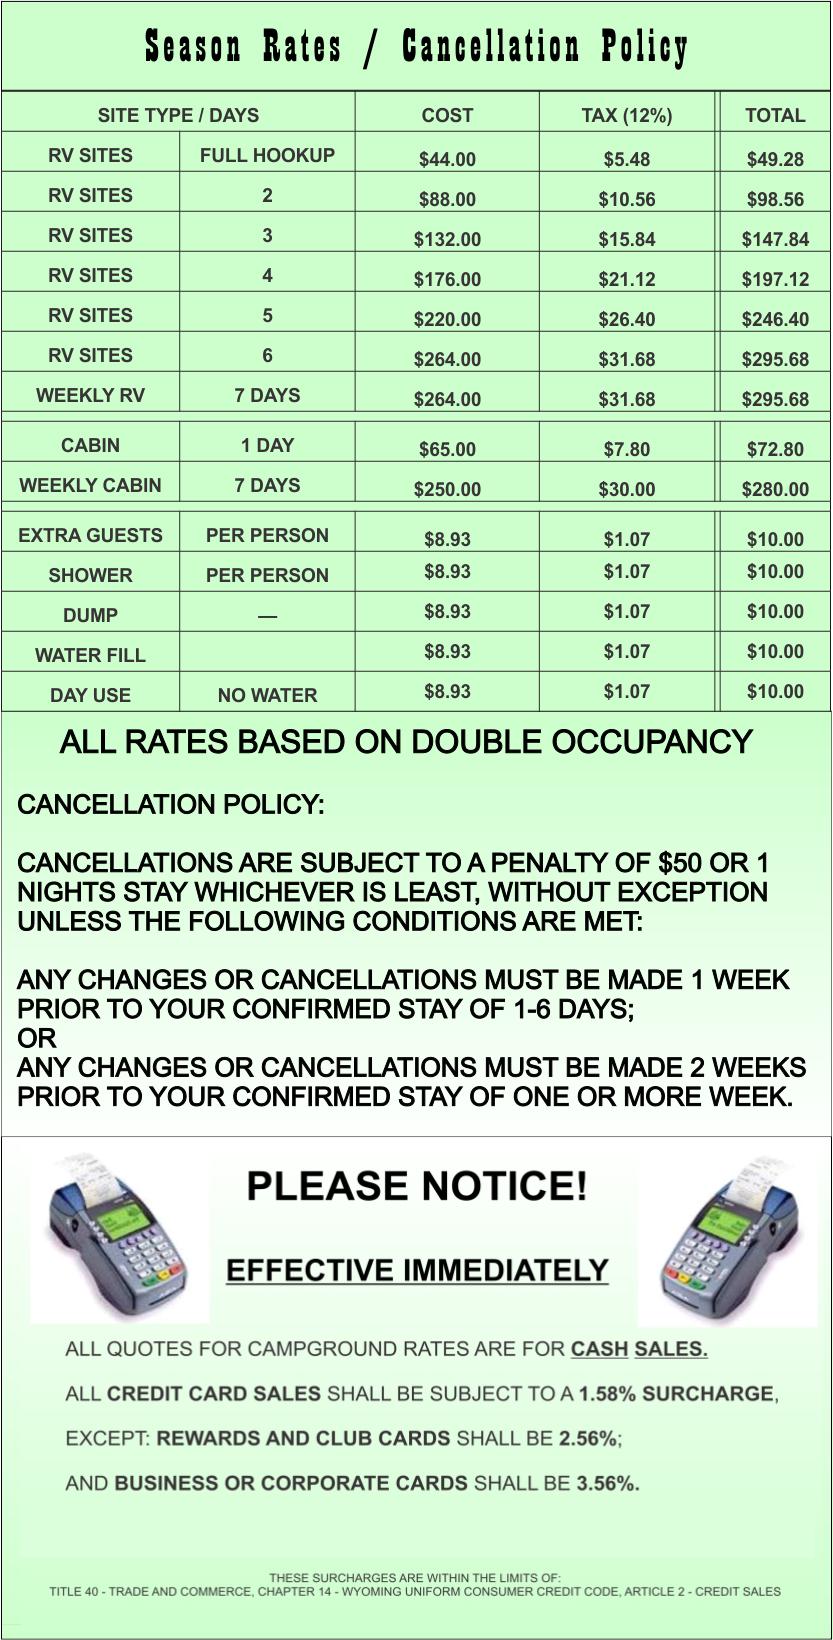 GREEN OASIS RV PARK, FIND DAILY AND WEEKLY FEES FOR FULL HOOKUP SITES, CABIN AND DAY USE. SEE ALSO OUR CANCELLATION POLICY AND CREDIT CARD CONVENIENCE FEES.